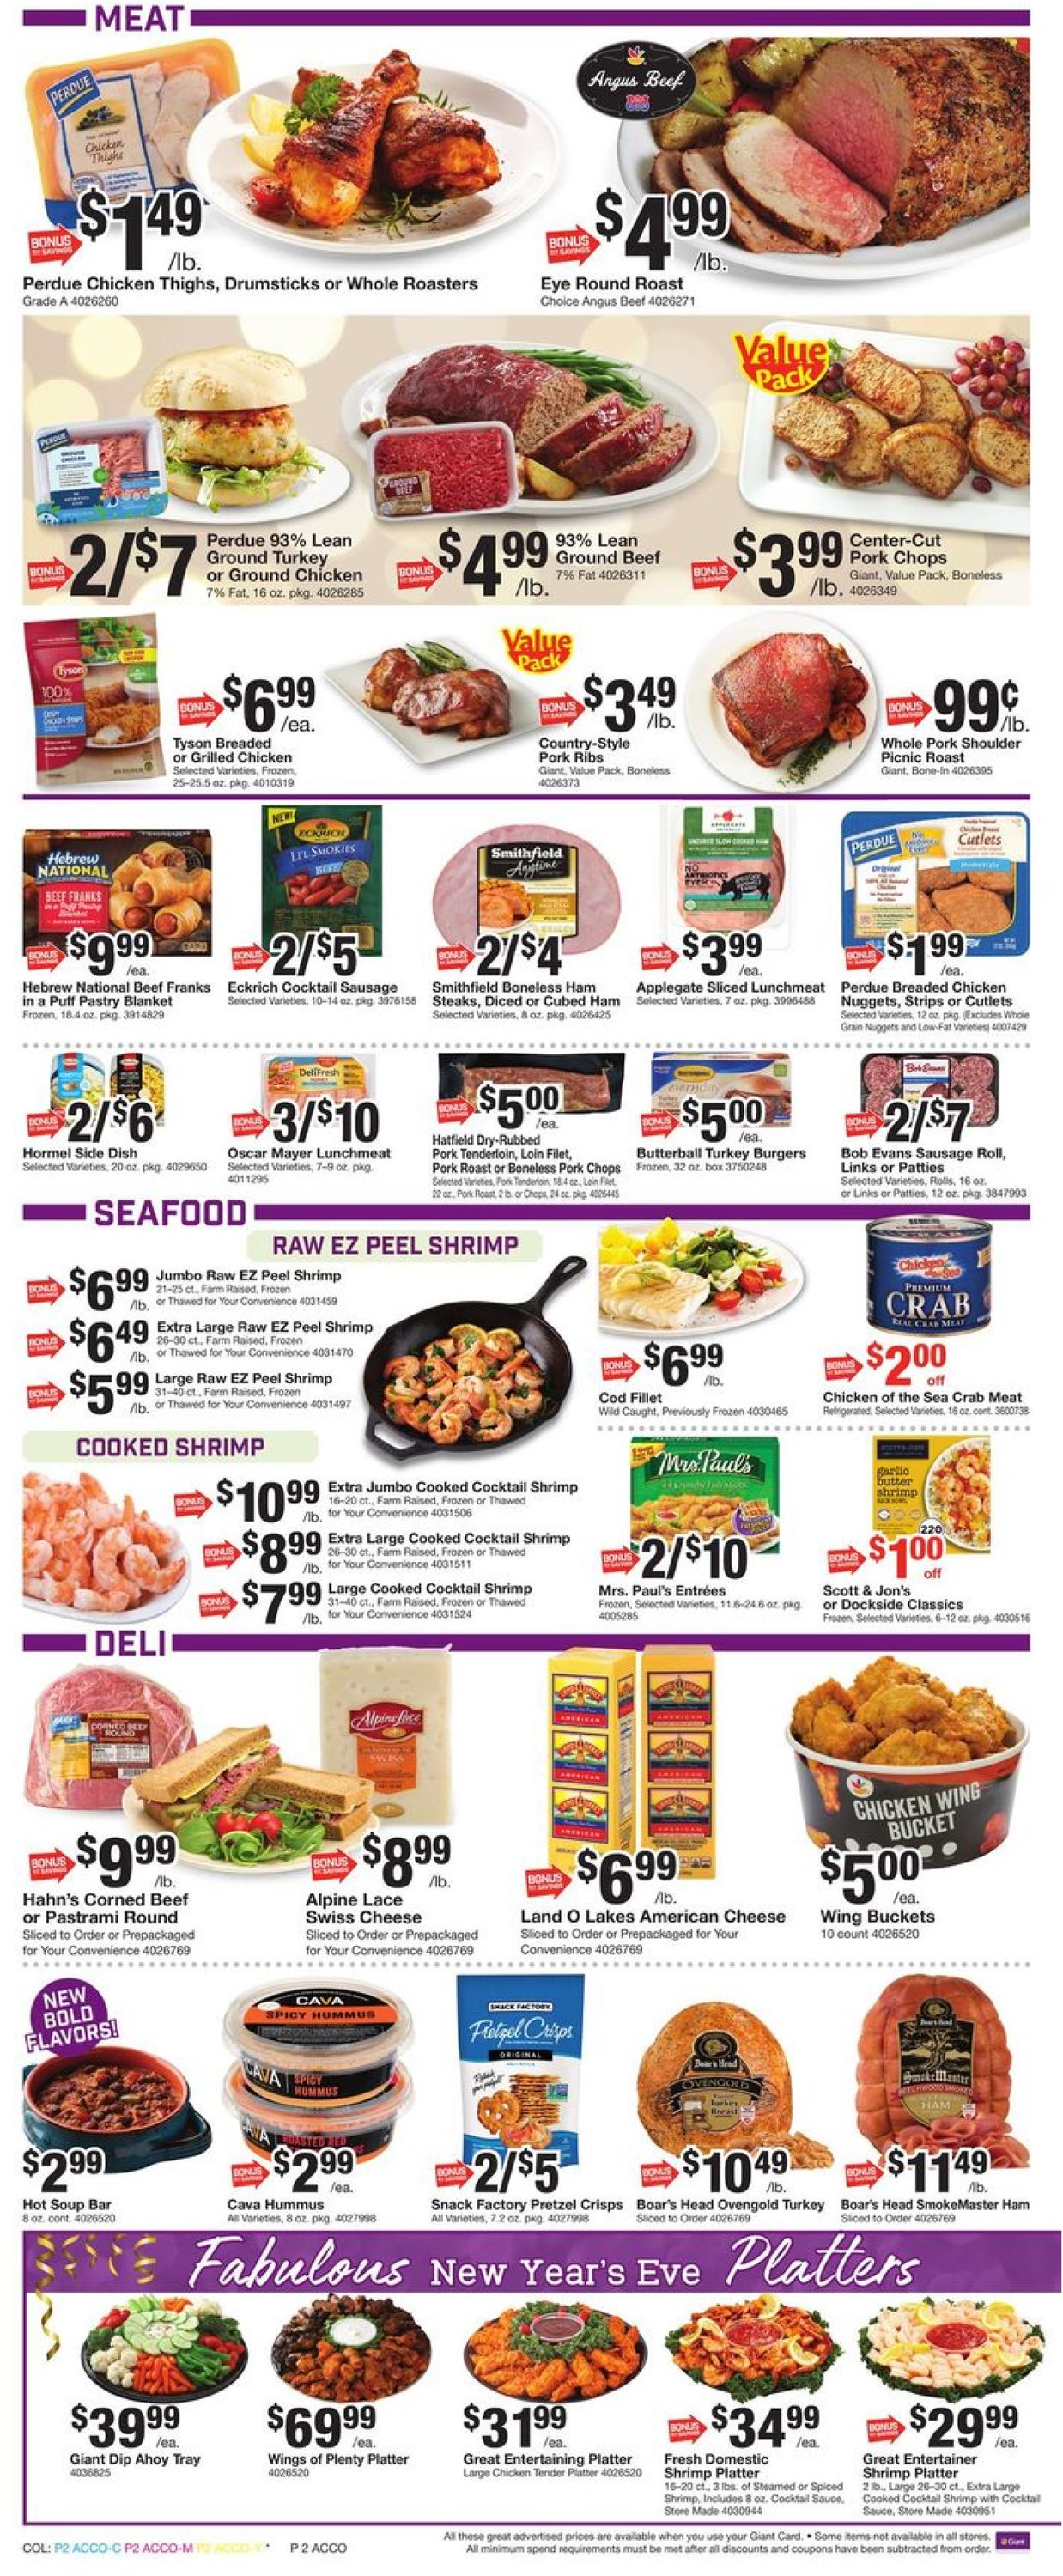 Catalogue Giant Food - New Year's Ad 2019/2020 from 12/27/2019